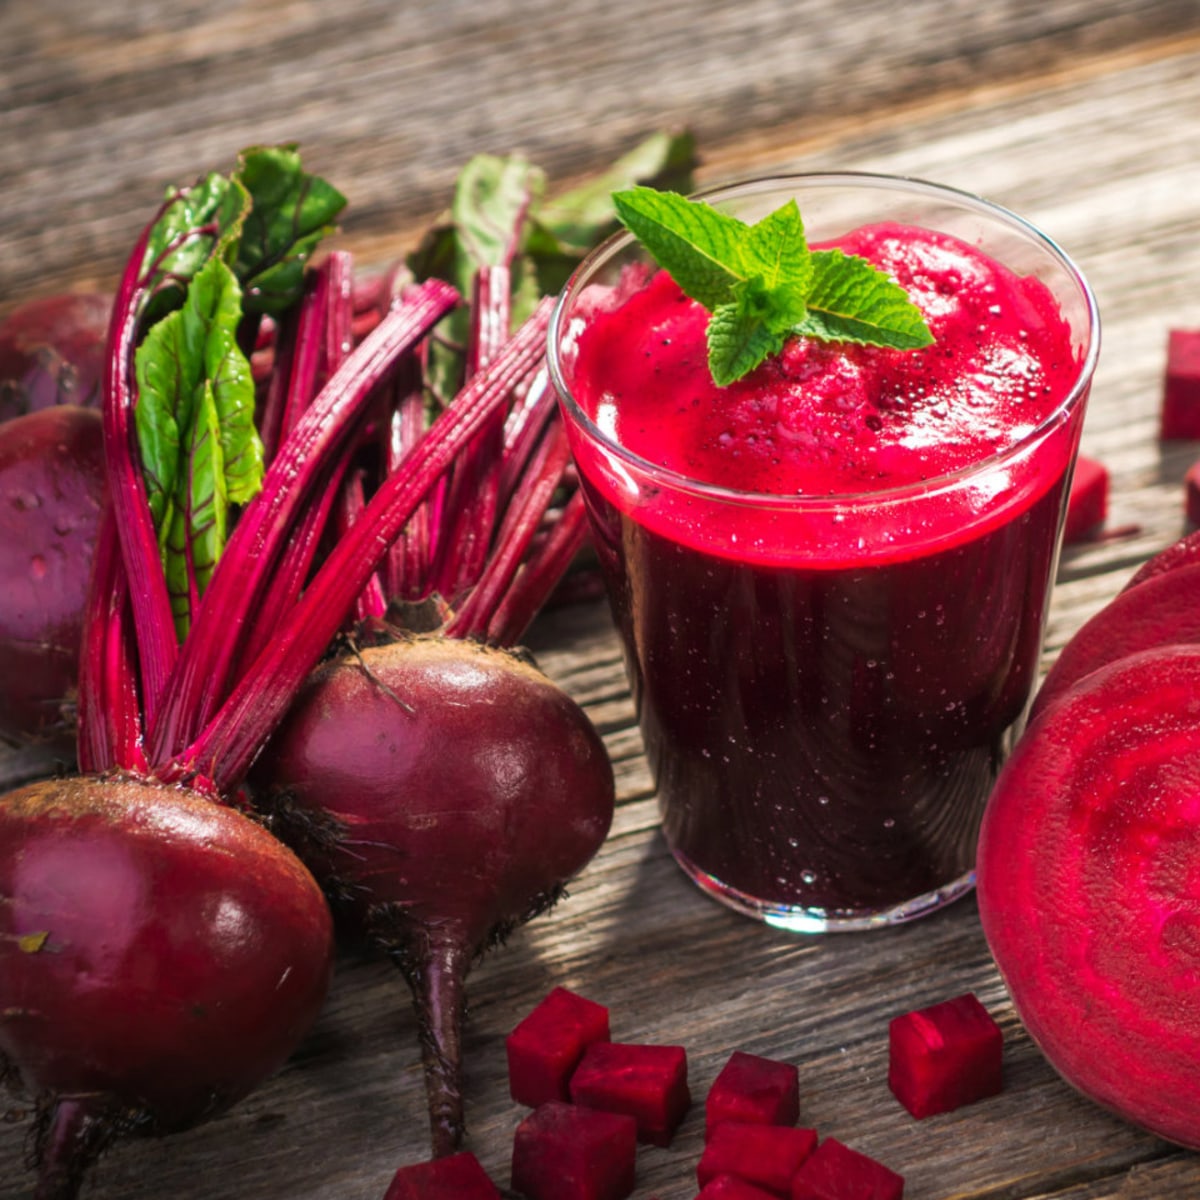 How to Boost Your Workout With a Glass of Beet Juice